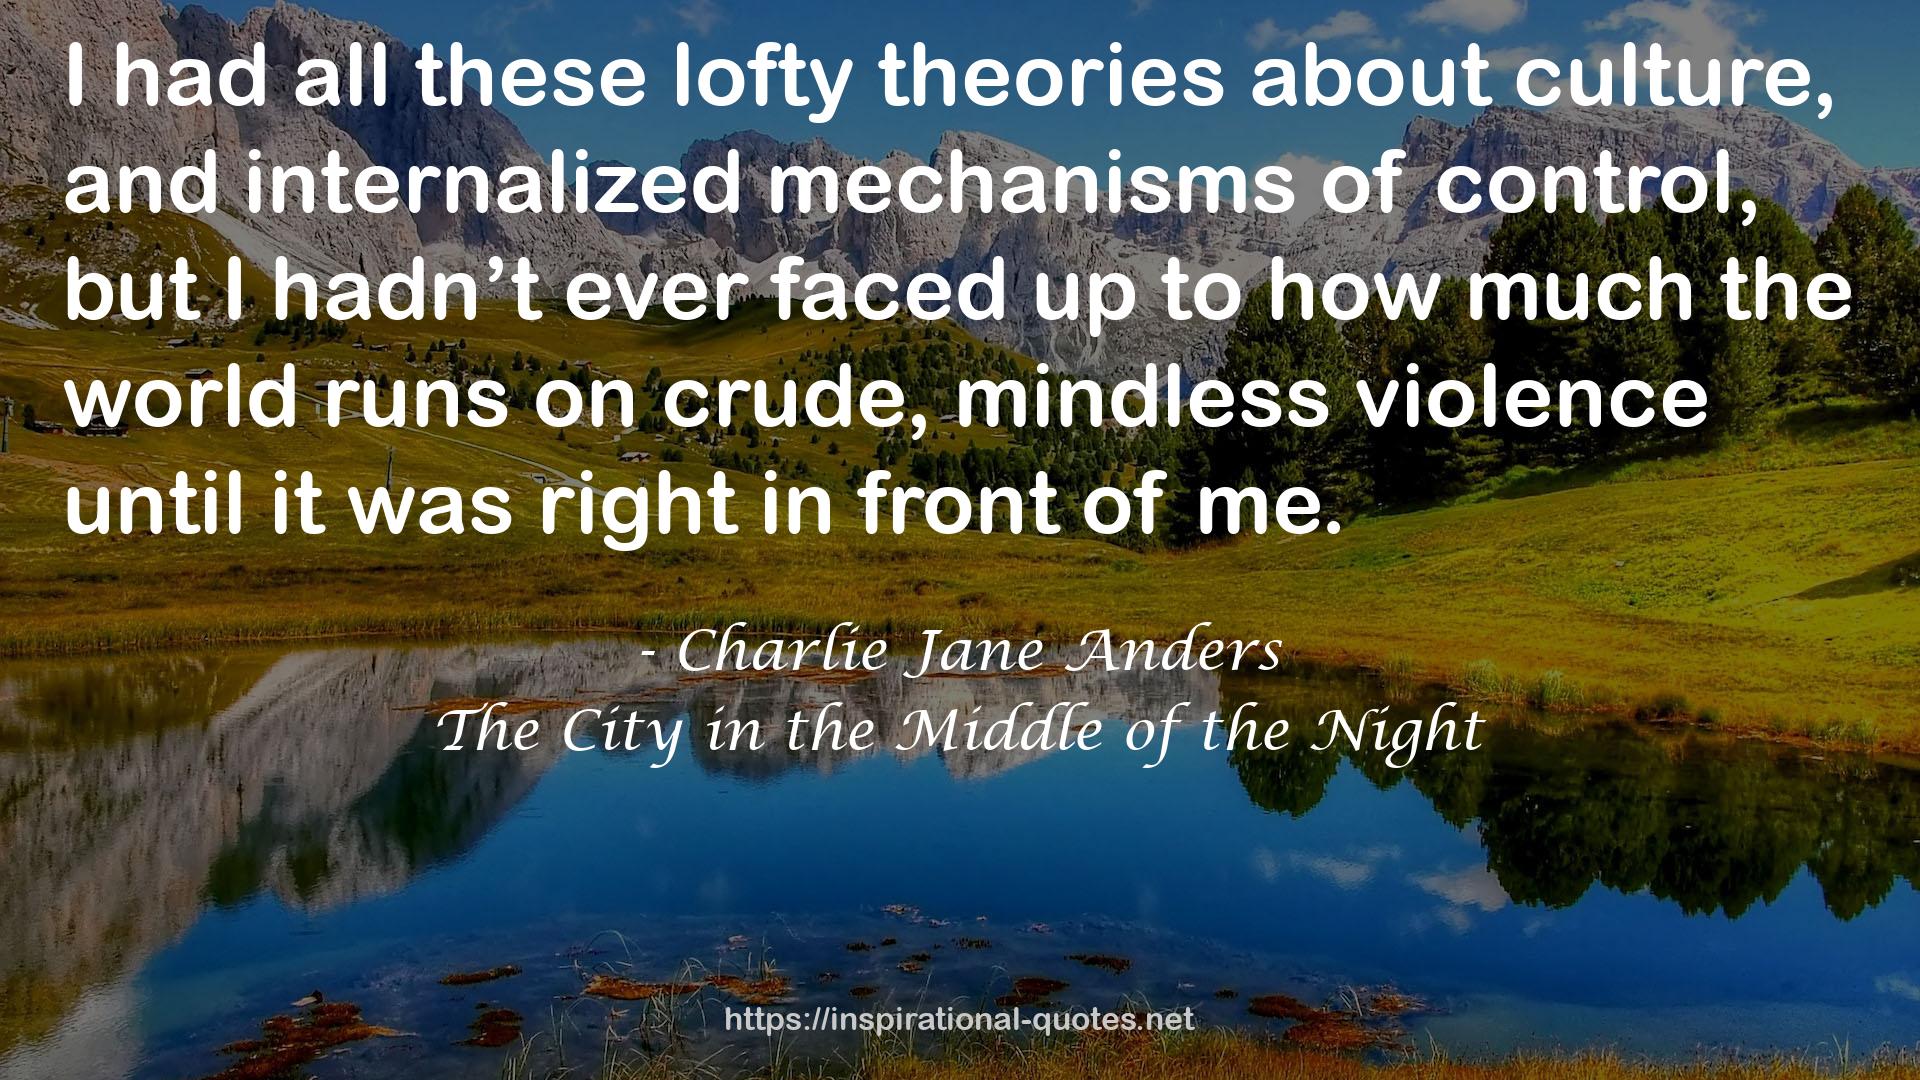 The City in the Middle of the Night QUOTES